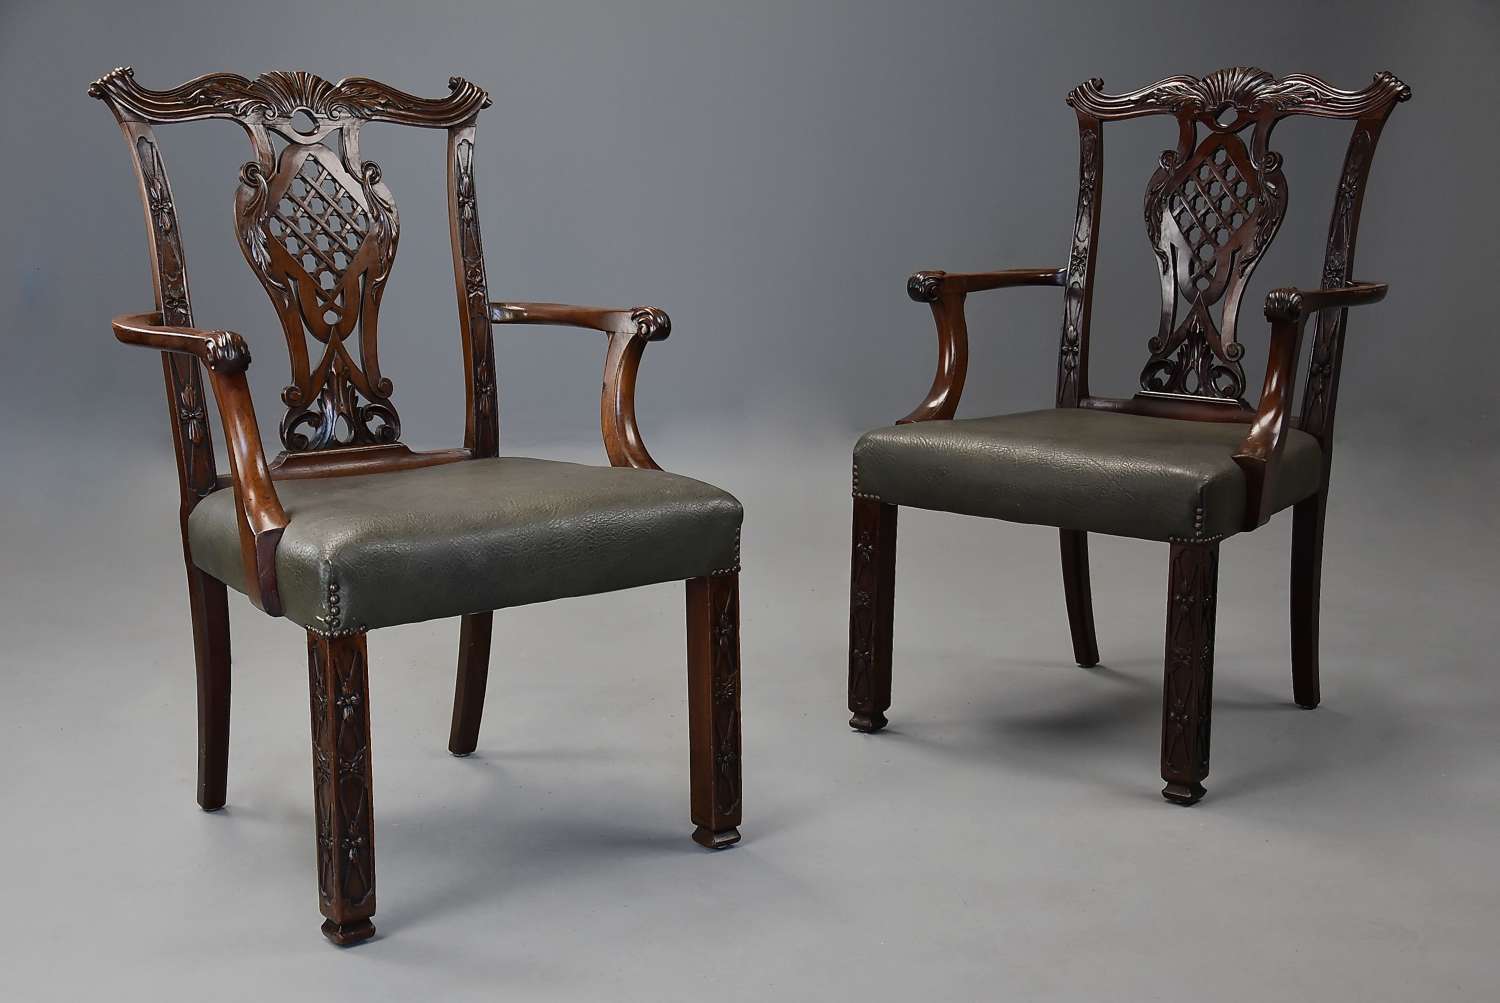 Pair of fine quality Chippendale style mahogany open armchairs